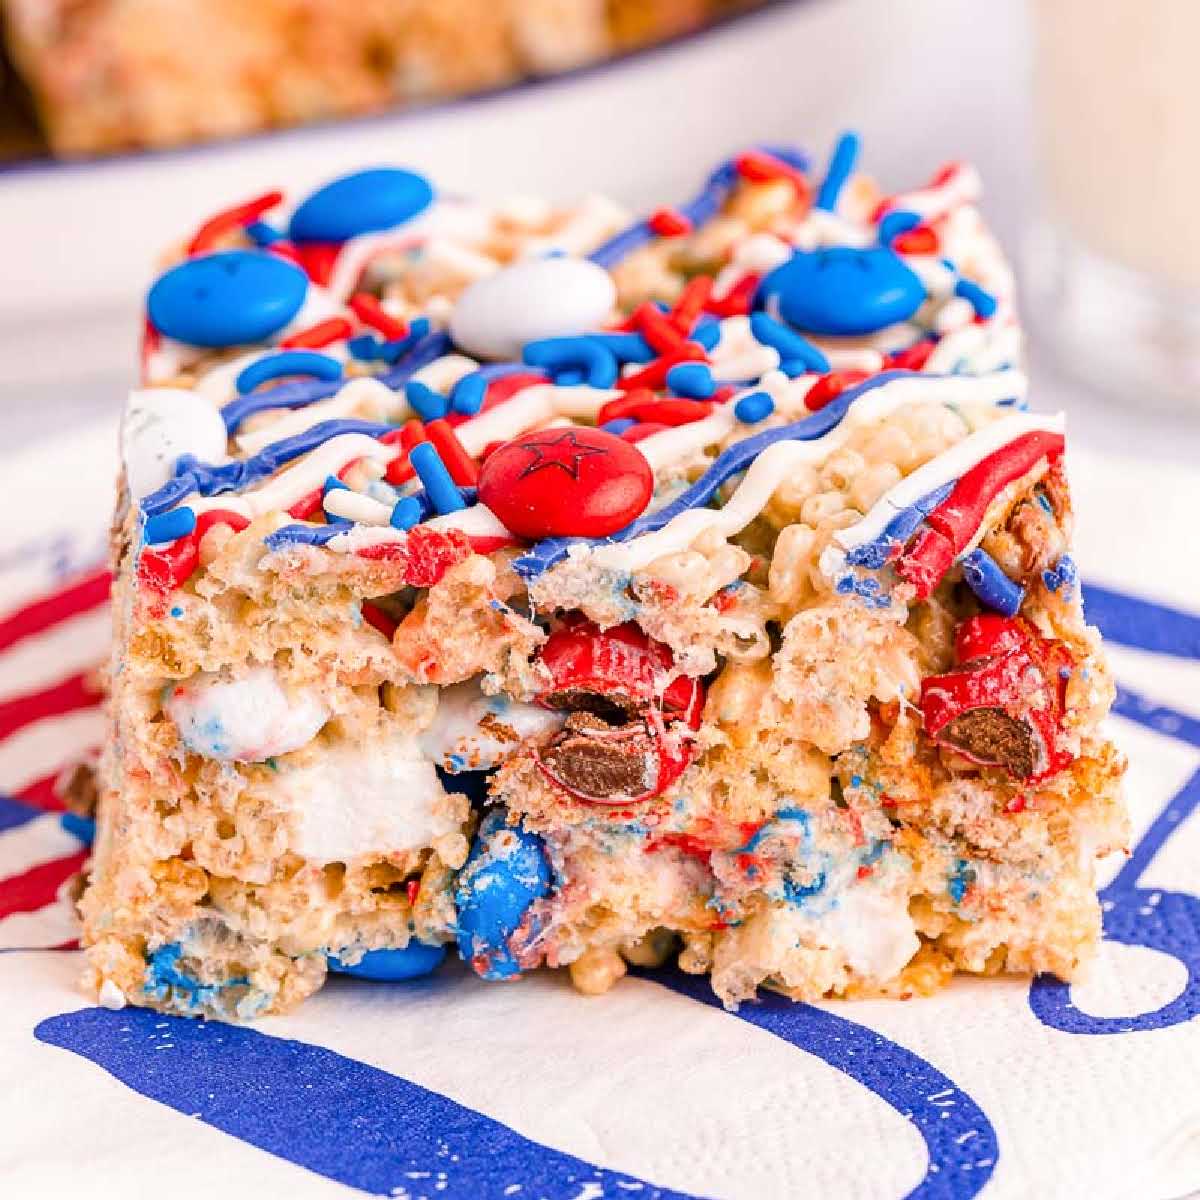 Close up of a red, white and blue rice krispie treat on a swirled napkin.